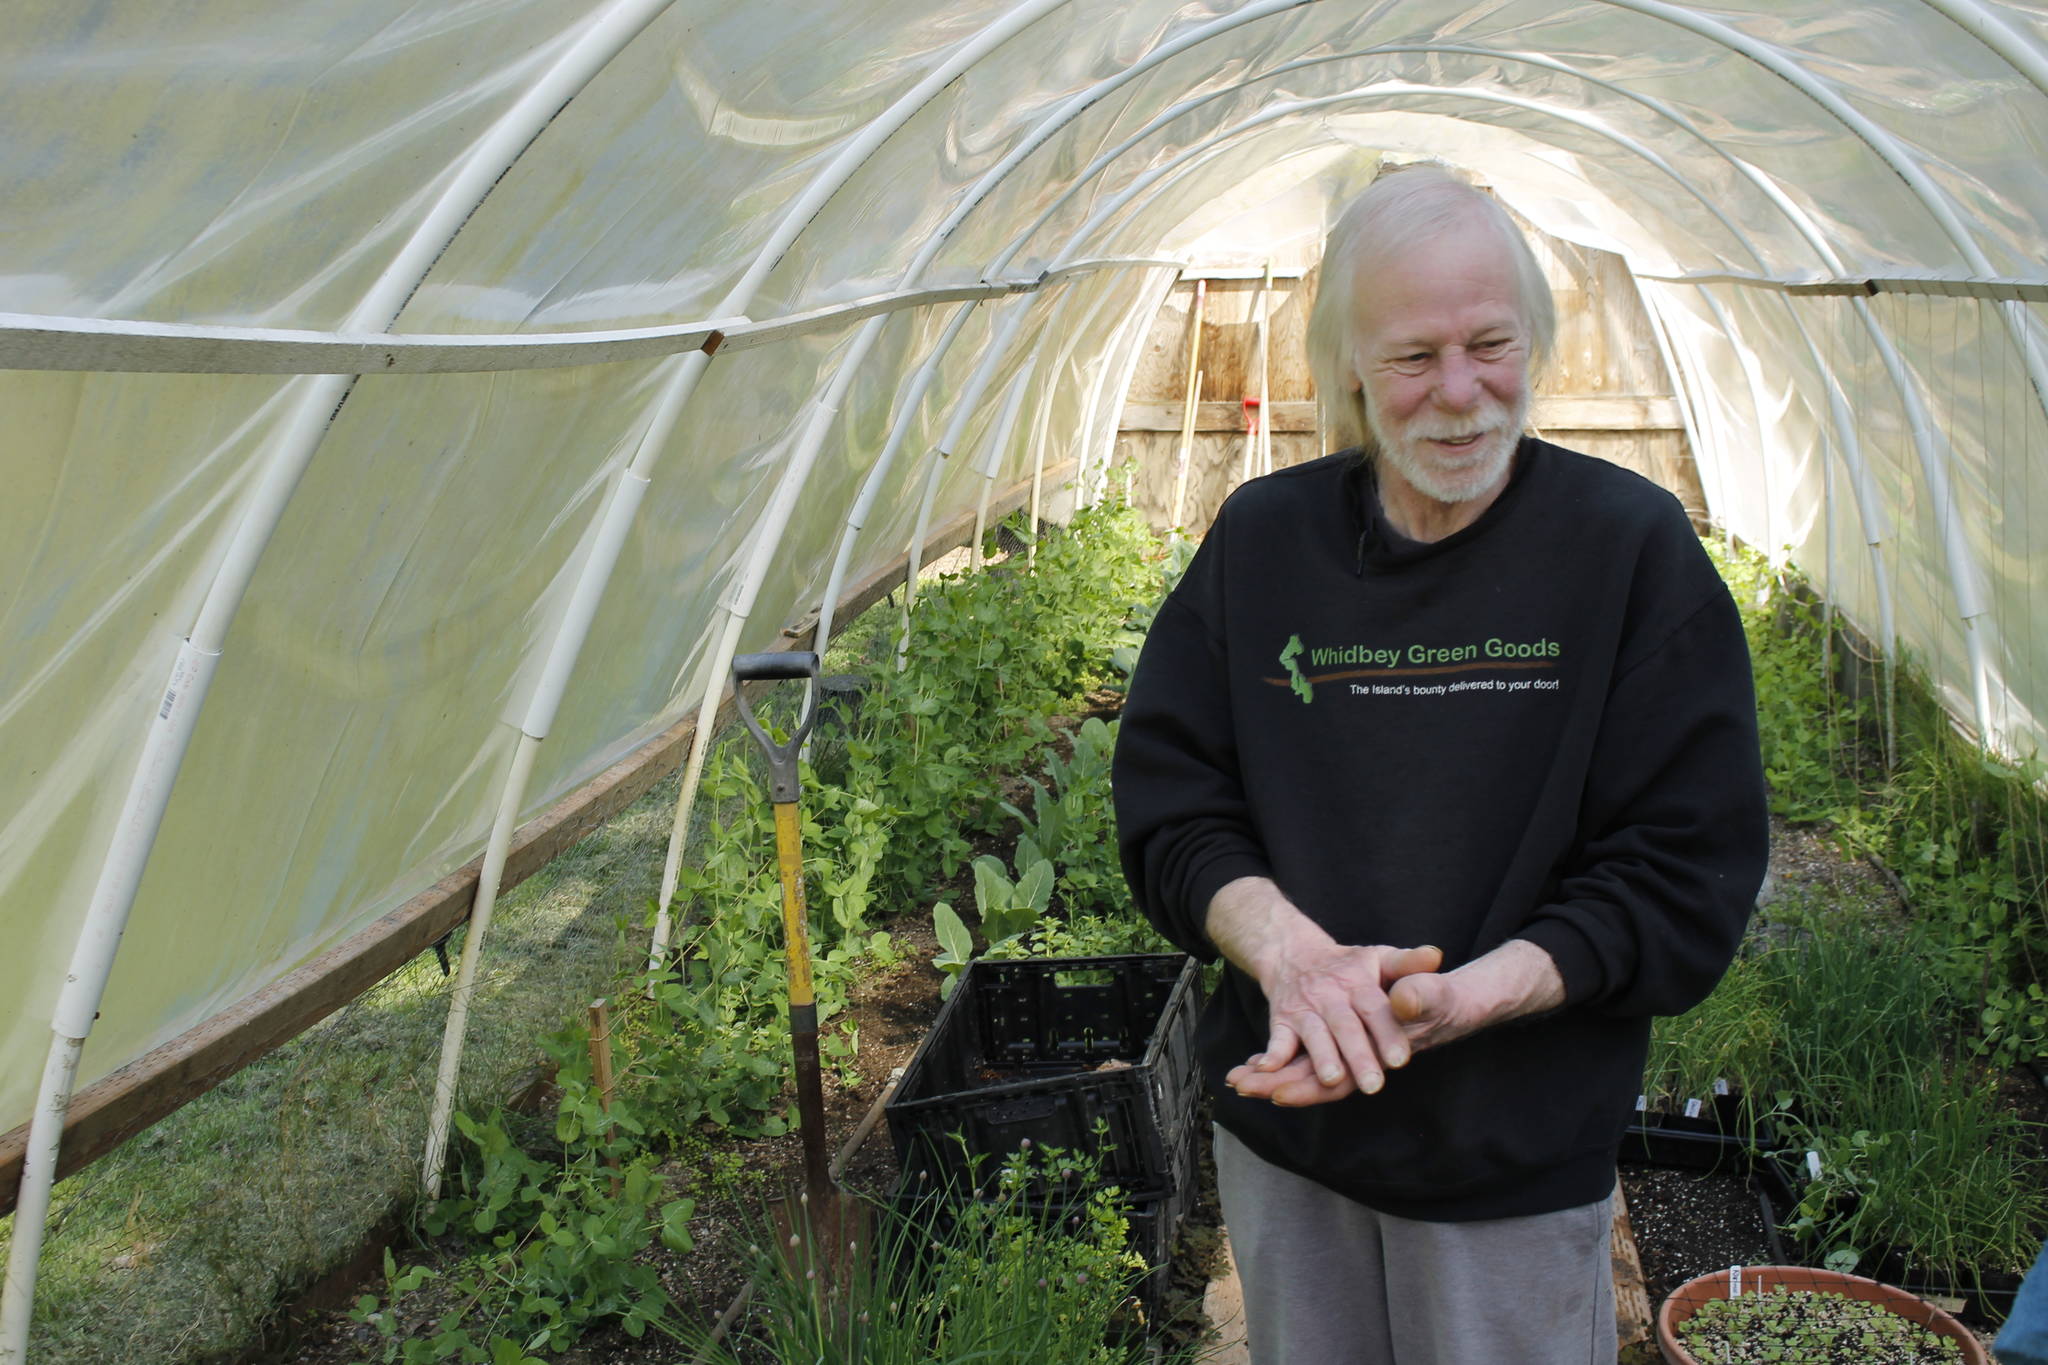 Michael Nichols, owner of Whidbey Green Goods, stands in his hoop house, also known as “The Hovel.” Customers visit the Clinton farm to pick up their own produce and plant starts. (Photo by Kira Erickson/Whidbey News Group)